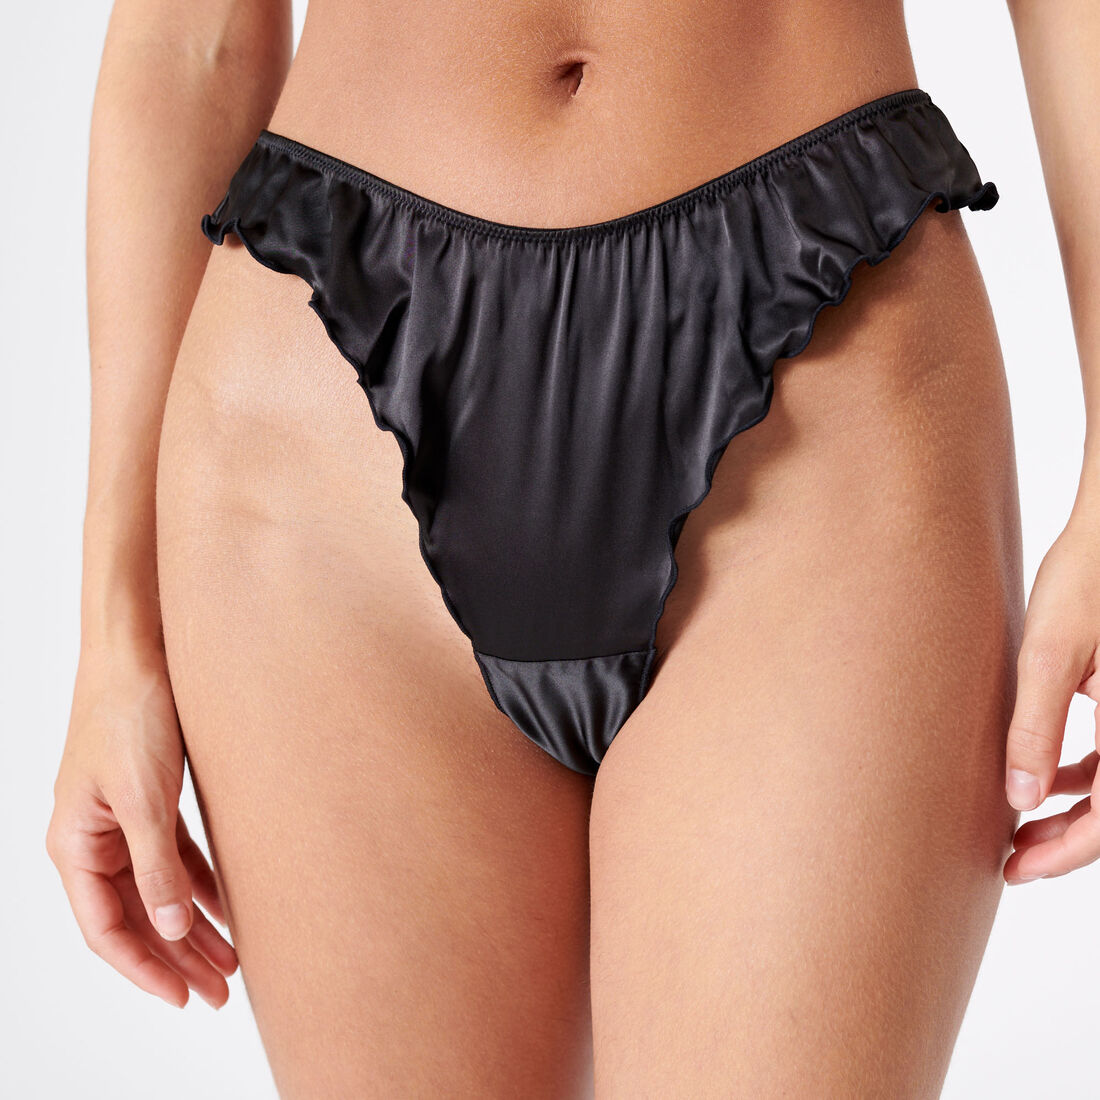 high-waisted satin knickers;